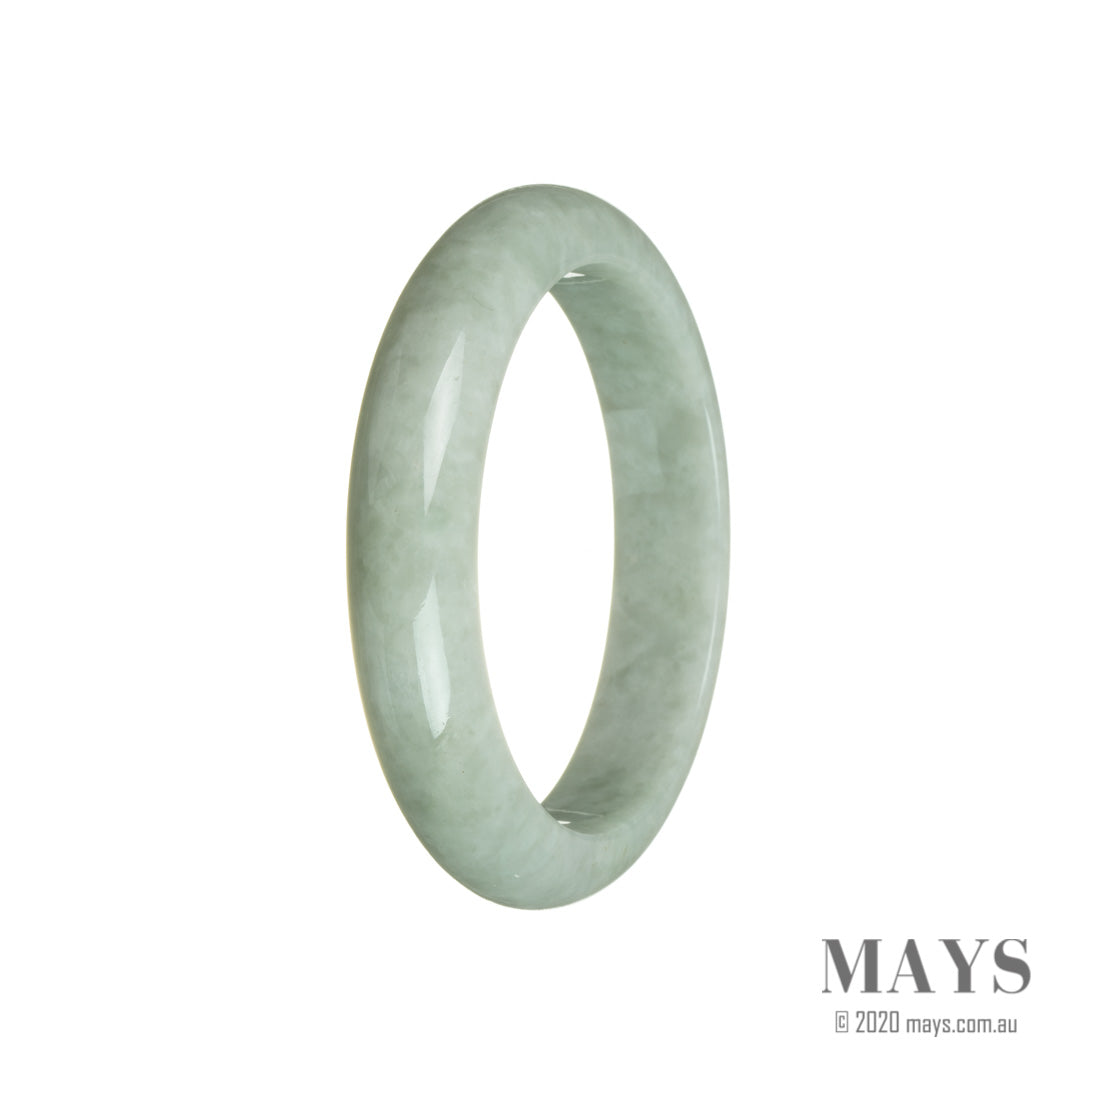 Image of an exquisite jade bangle bracelet with a vibrant green hue, featuring a unique half moon shape. This traditional piece is untreated, showcasing the natural beauty of the jade. Perfect for adding a touch of elegance and sophistication to any outfit.